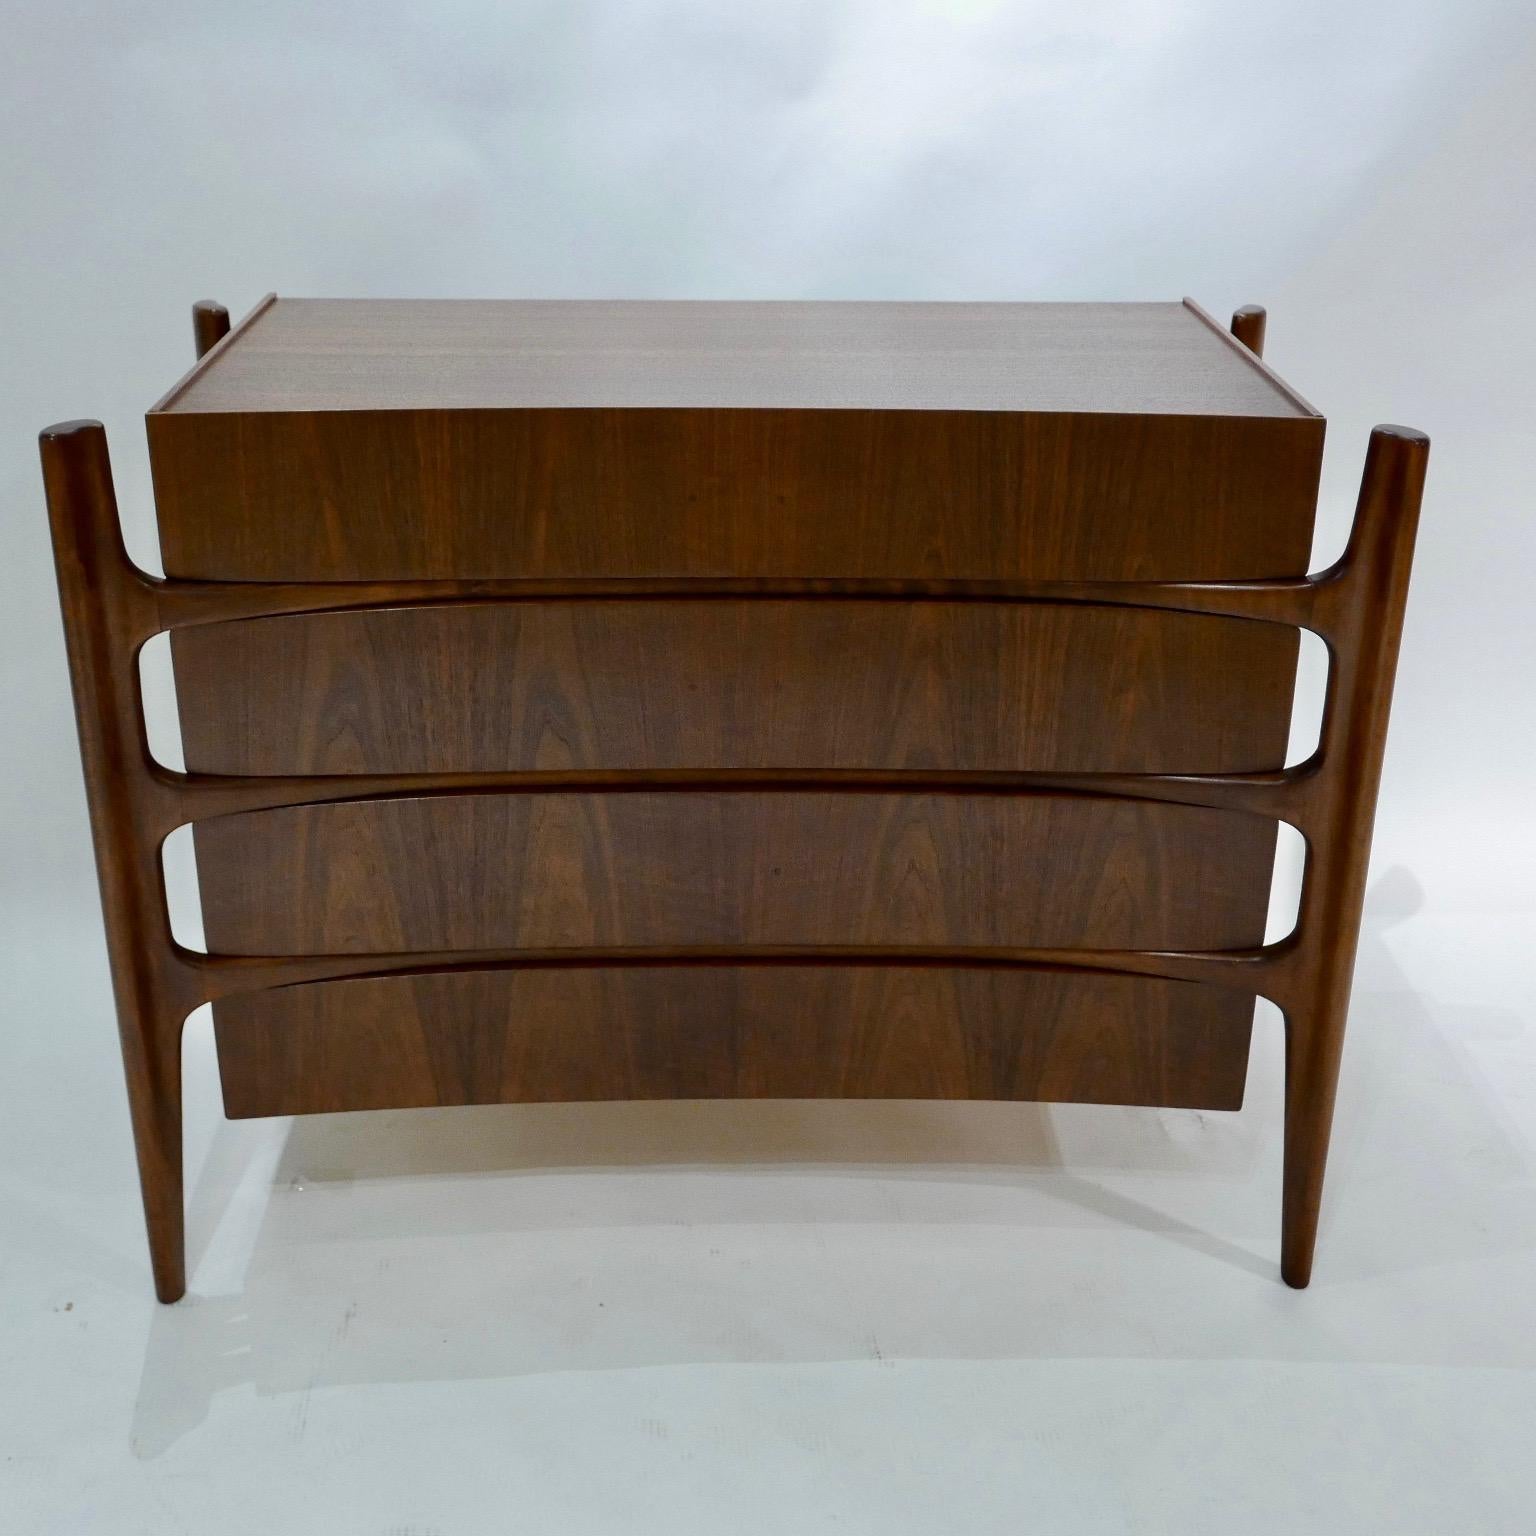 Exposed carved walnut legs with a curved bookmatched walnut front. Beautiful and Sculptural four draws dresser designed by William Hinn for Urban Furniture's 